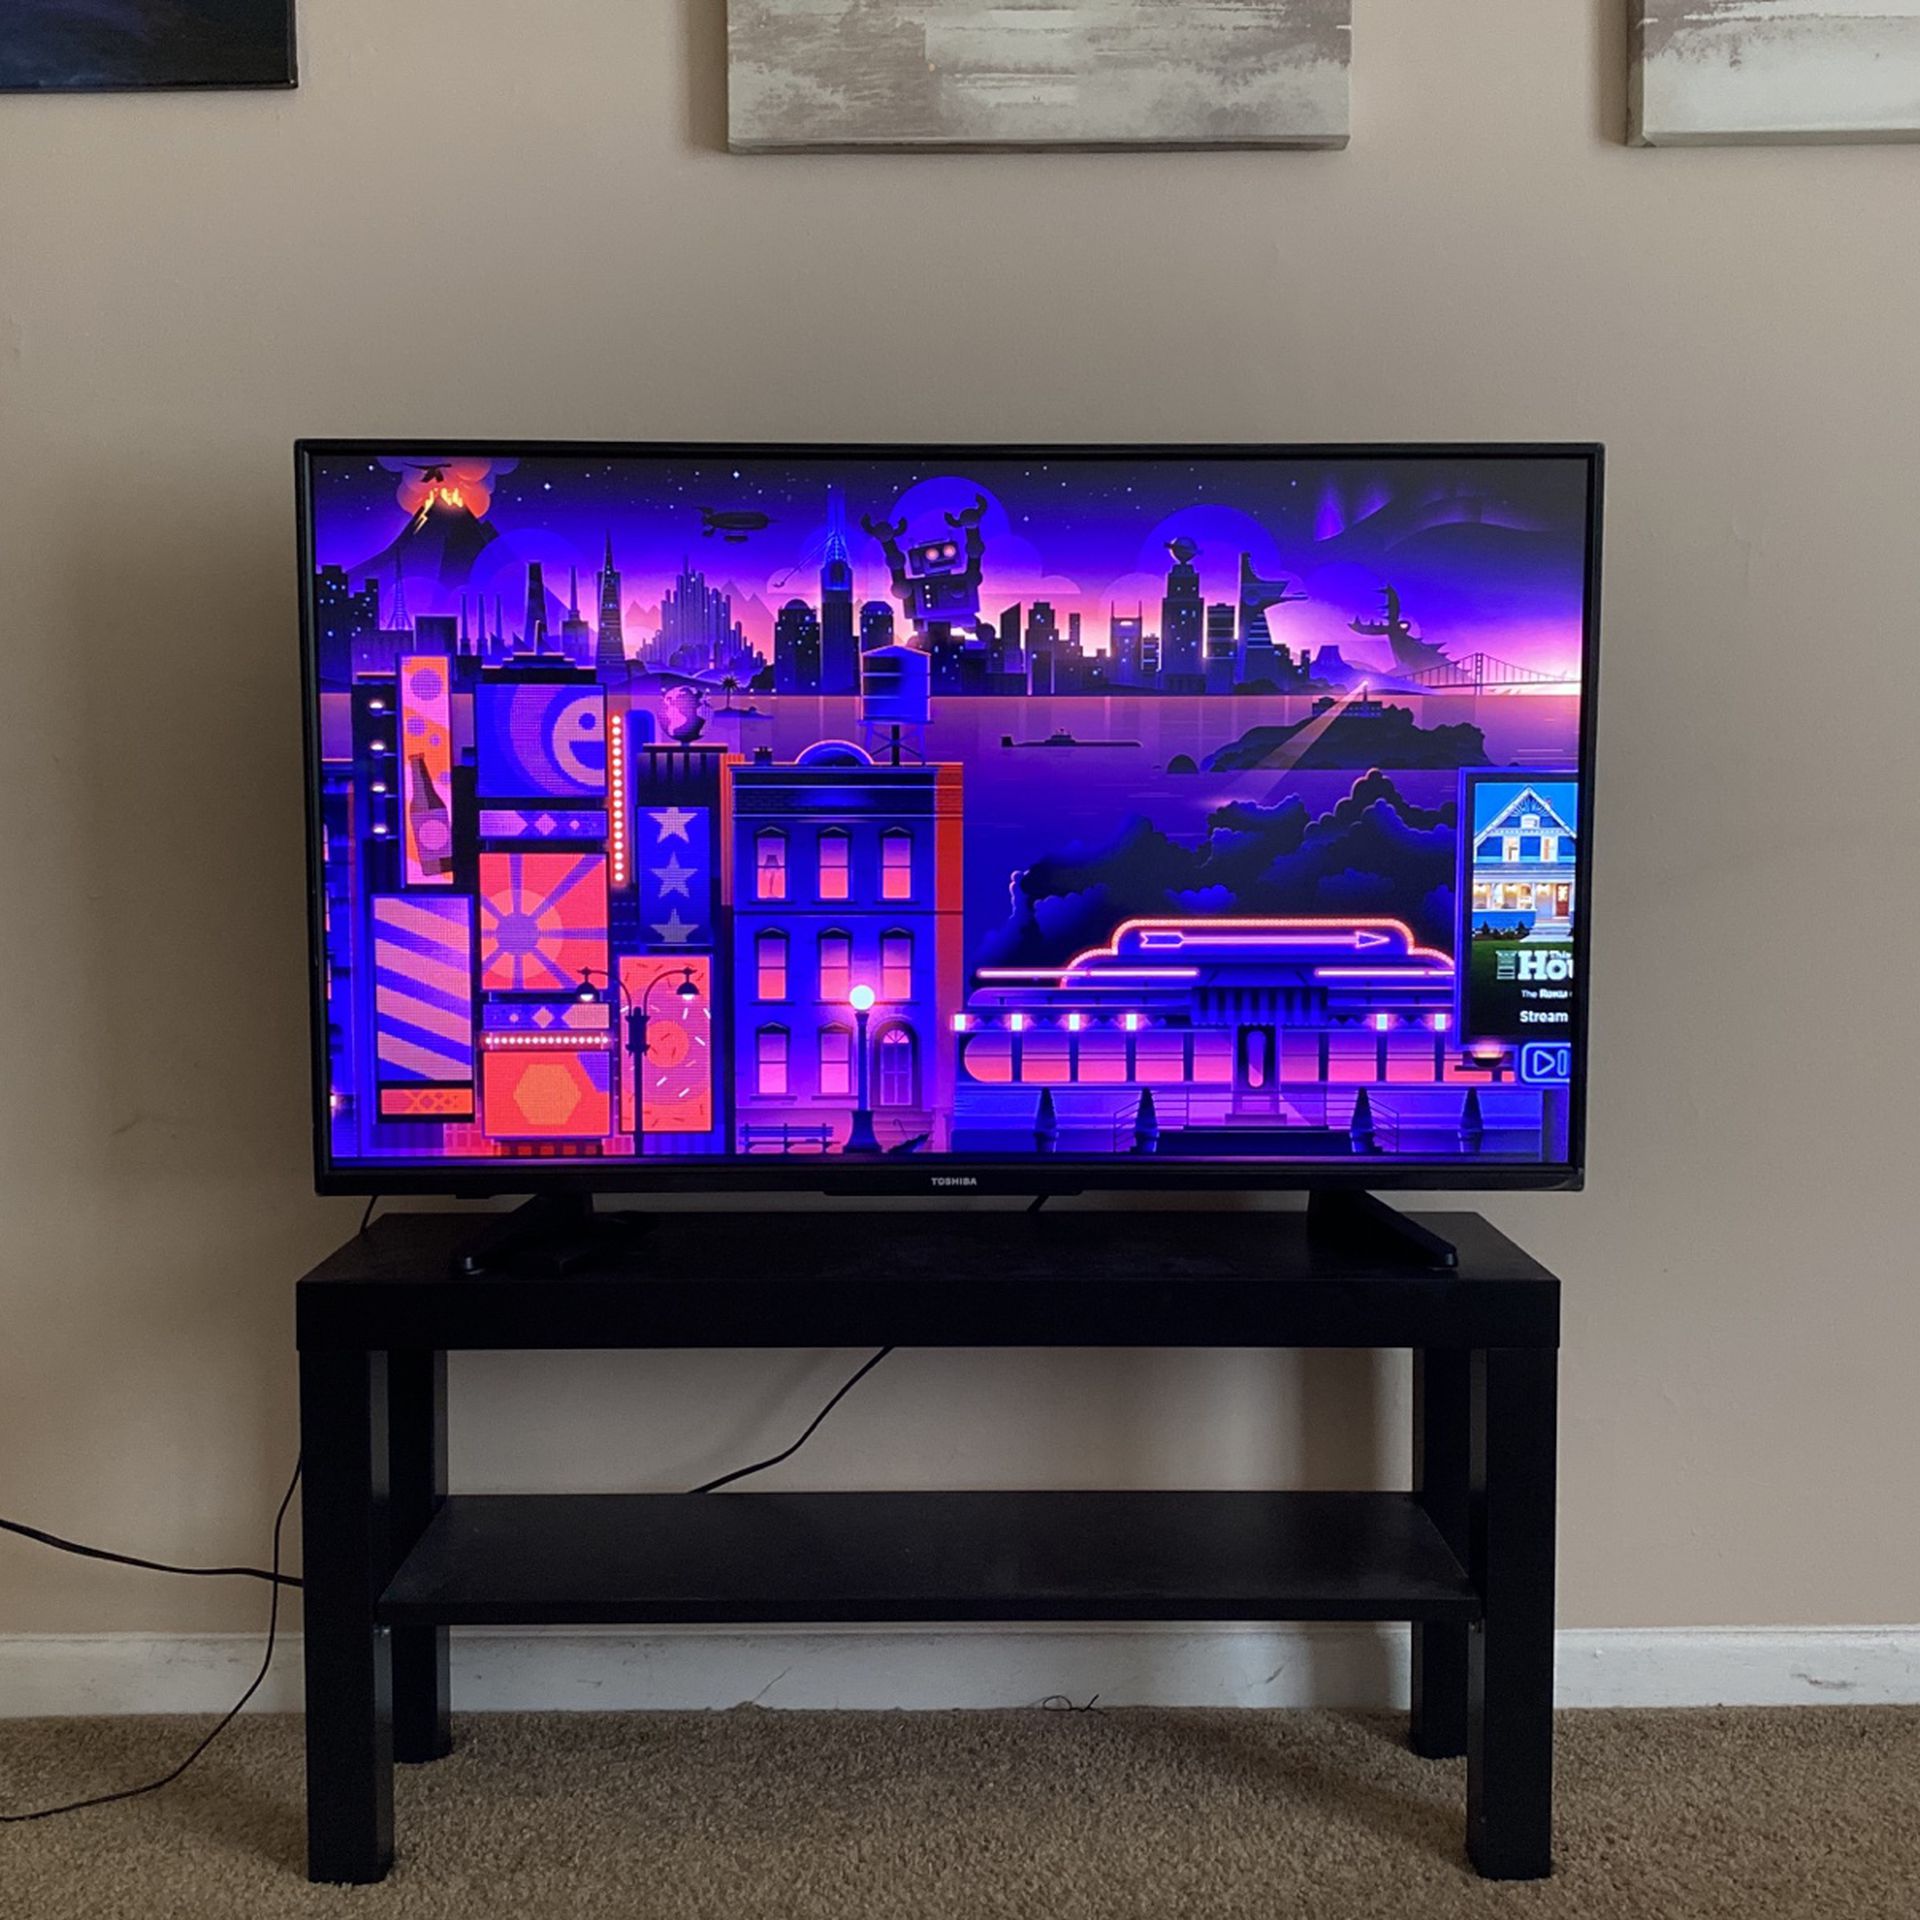 Great Condition 43” Toshiba Smart Enabled Chromecast TV